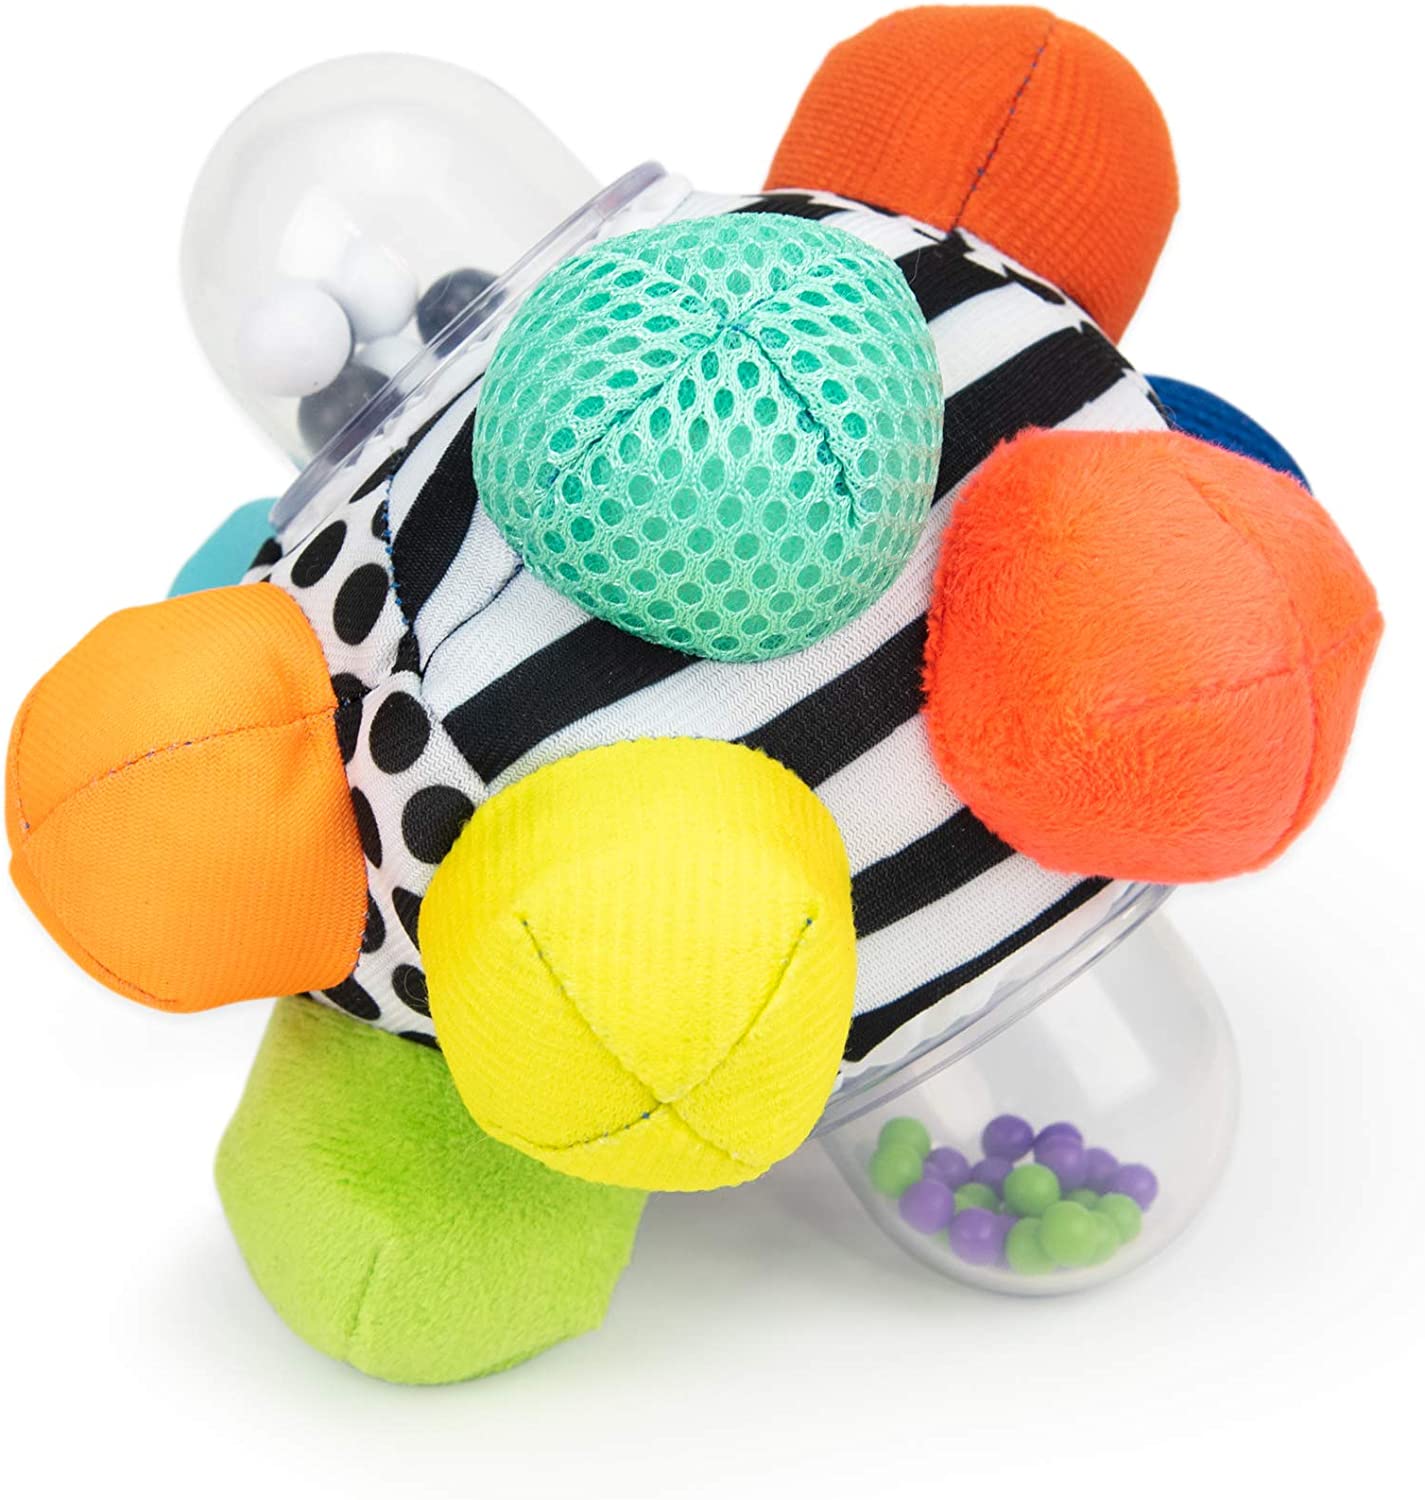 Sassy Developmental Bumpy Ball | Easy to Grasp Bumps Help Develop Motor Skills | for Ages 6 Months and Up | Colors May Vary
